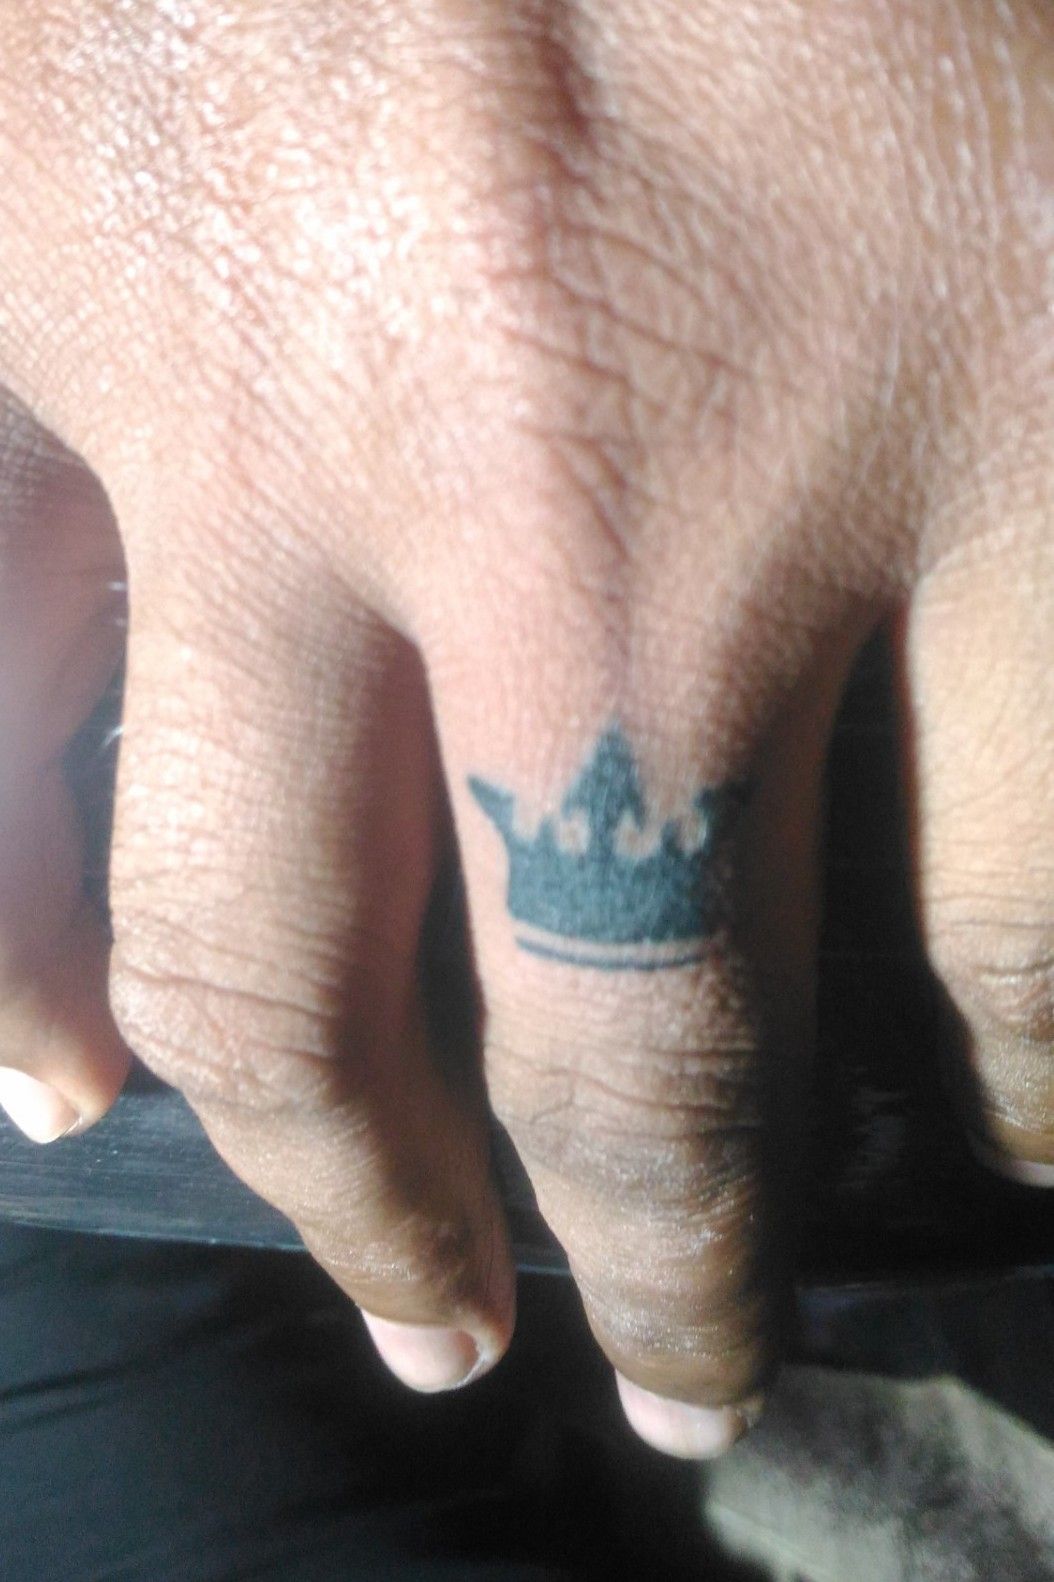 Tiny King and Queen Crowns  SemiPermanent Tattoo  Not a Tattoo